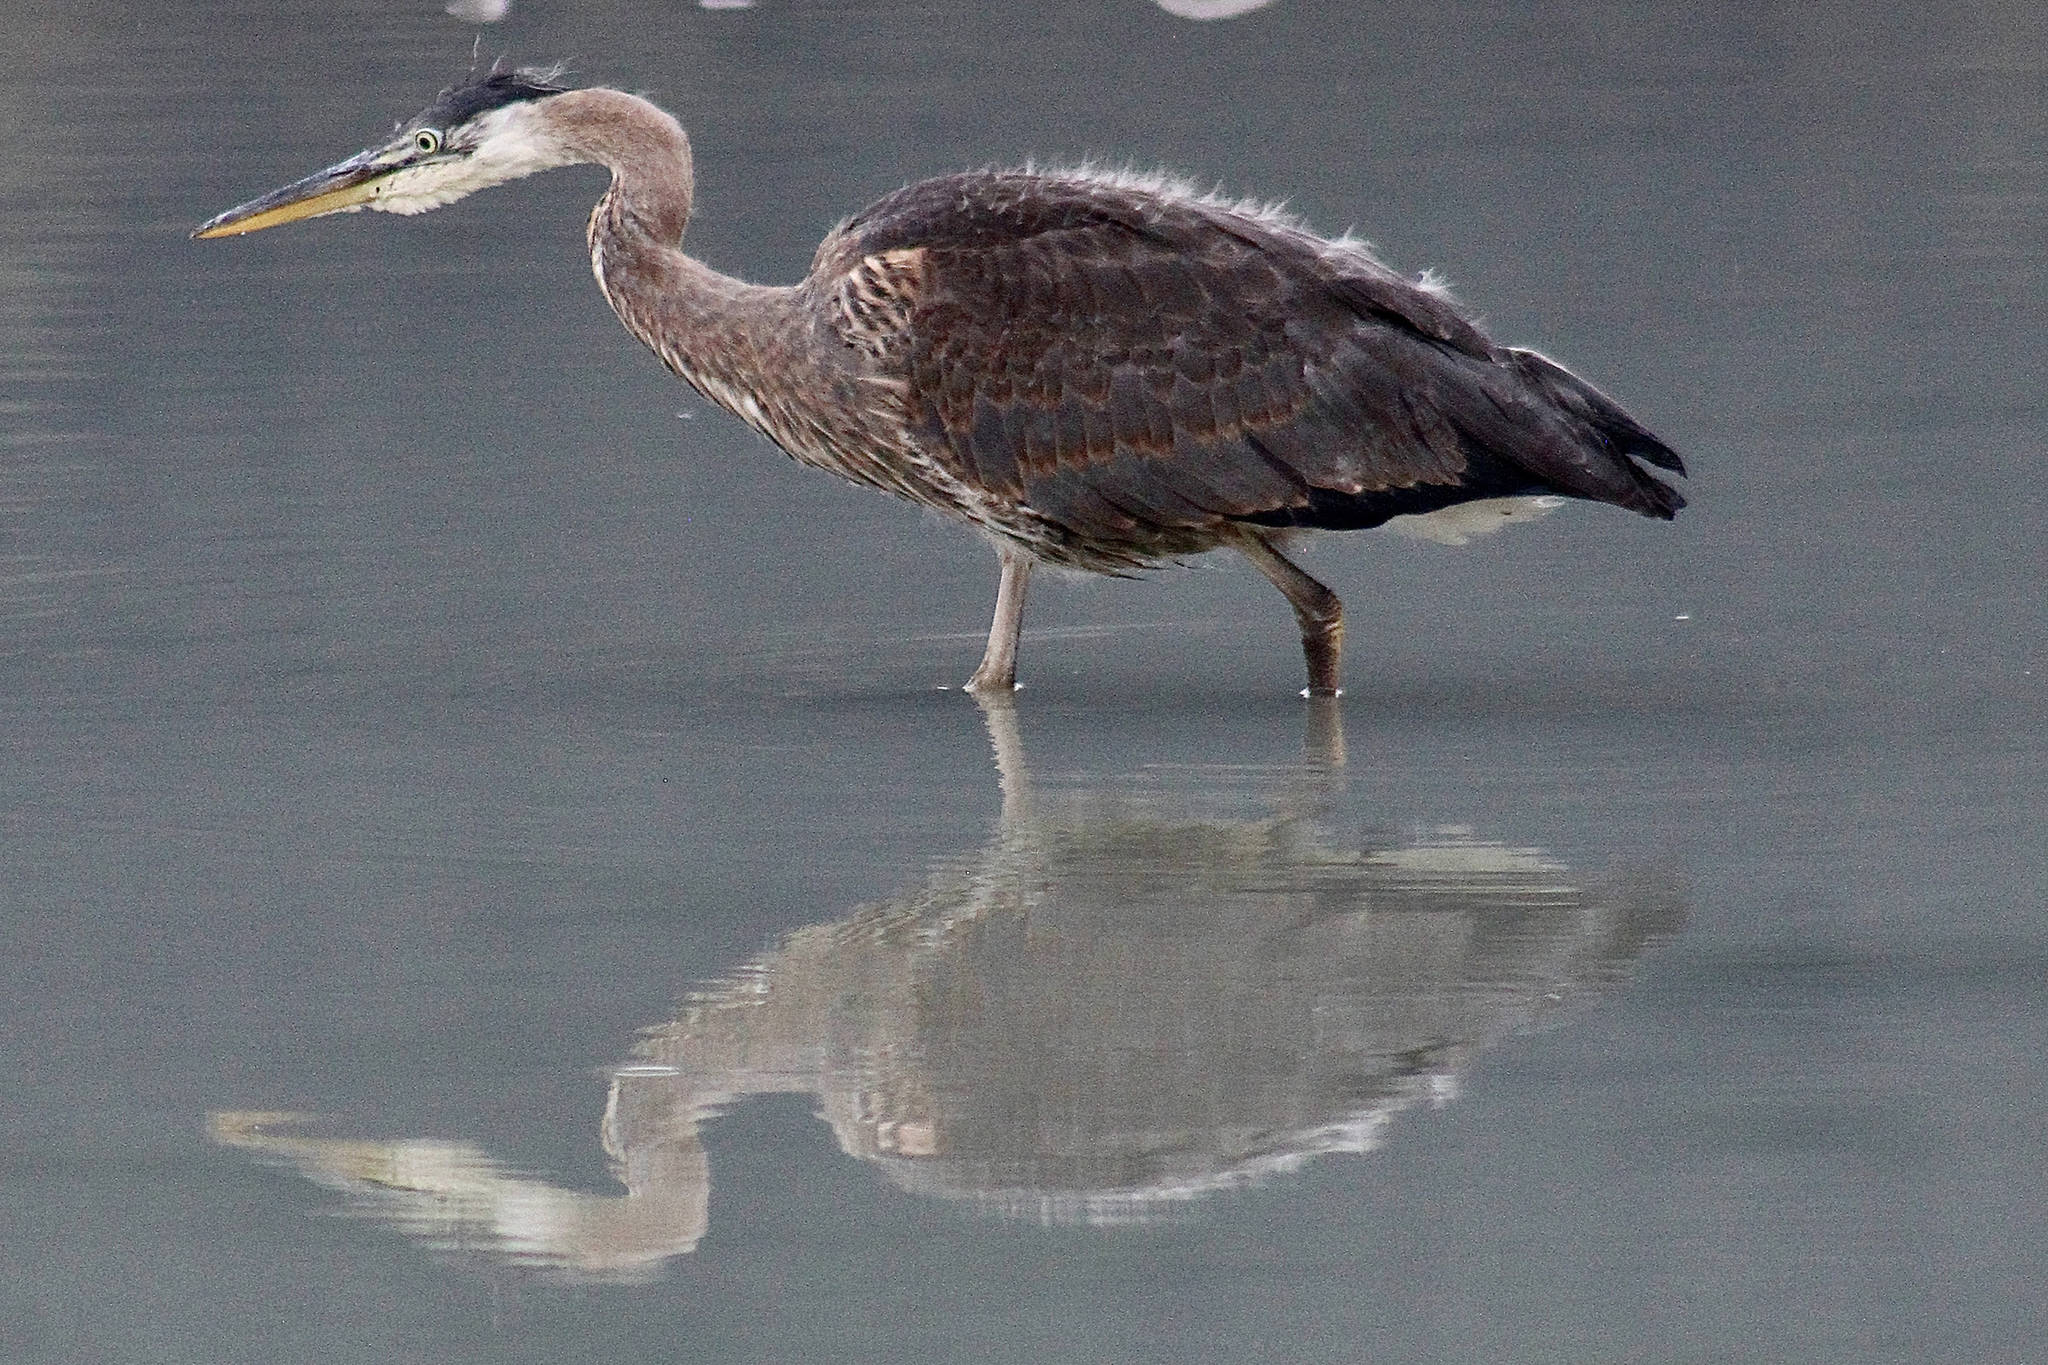 A blue heron wades in the water Sept. 22, 2020 at the Mendenhall Glacier. (Courtesy Photo / Bergen Davis)